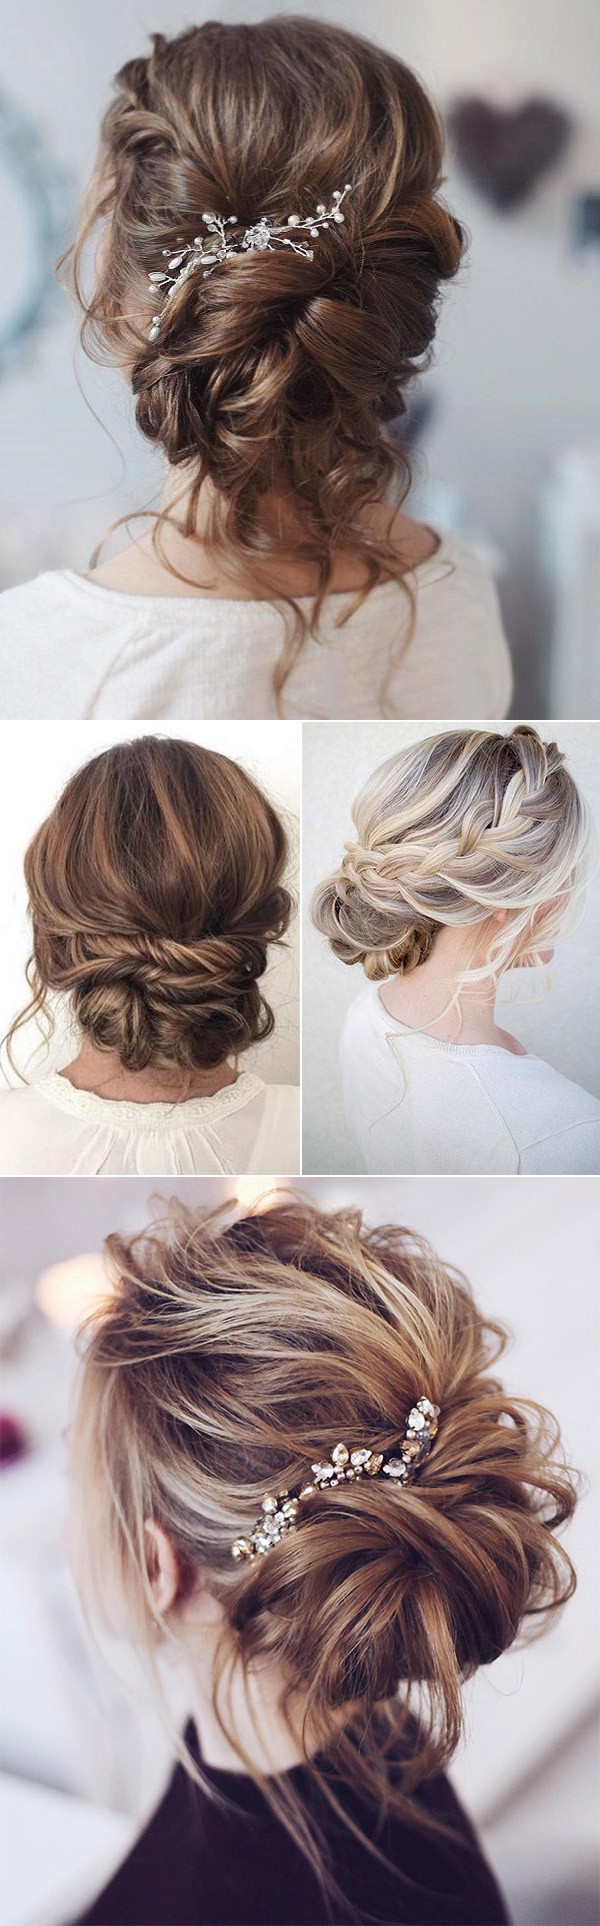 Loose Wedding Hairstyles
 25 Drop Dead Bridal Updo Hairstyles Ideas for Any Wedding